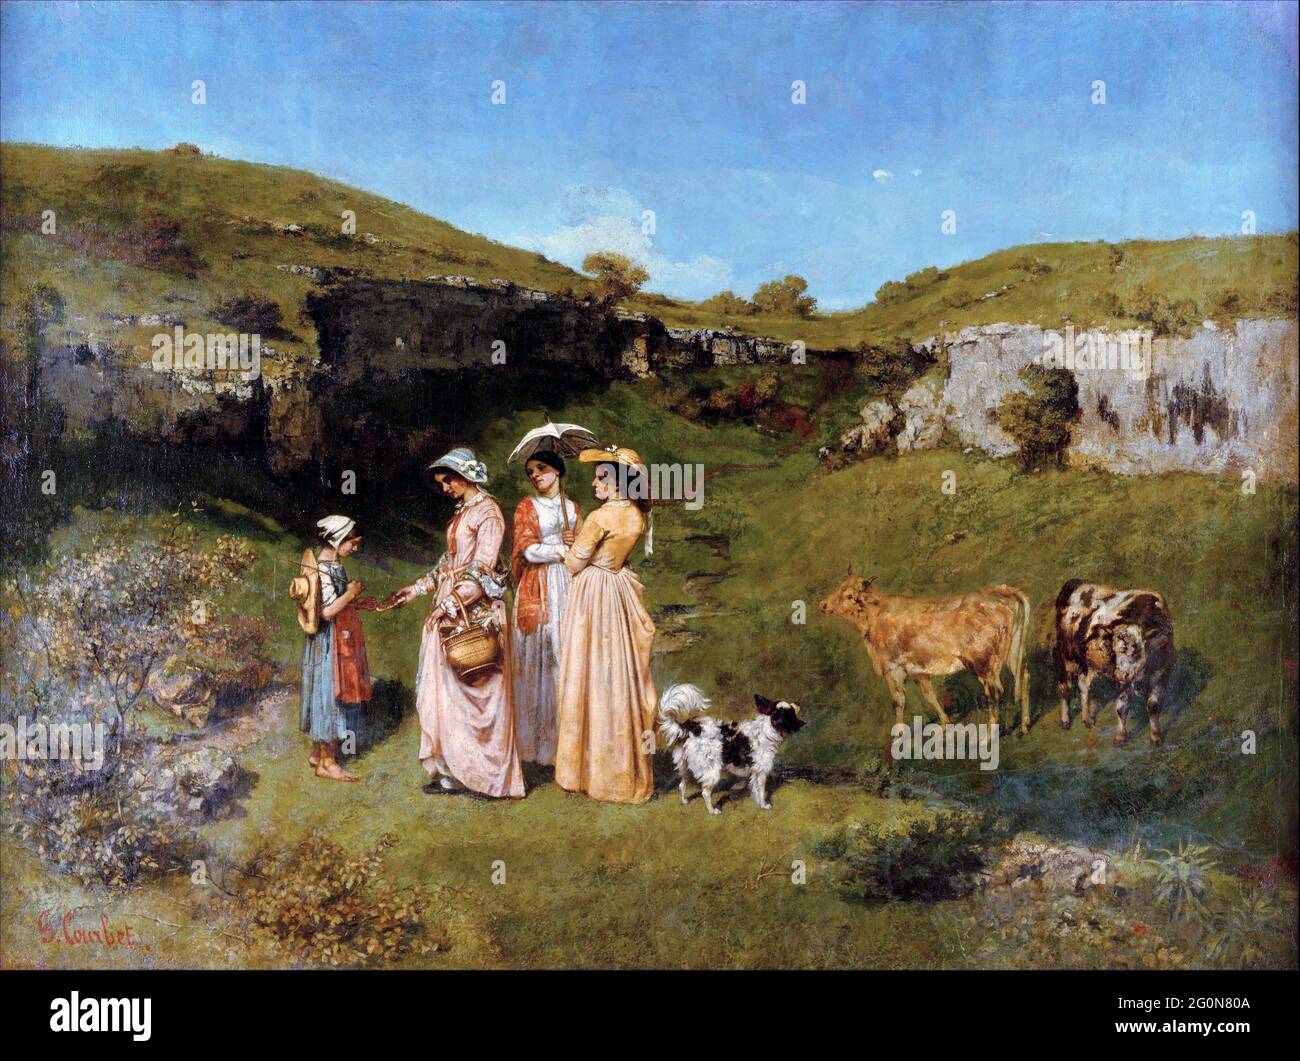 Young Ladies of the Village by Gustave Courbet (1819-1877), oil on canvas, c. 1851/2 Stock Photo